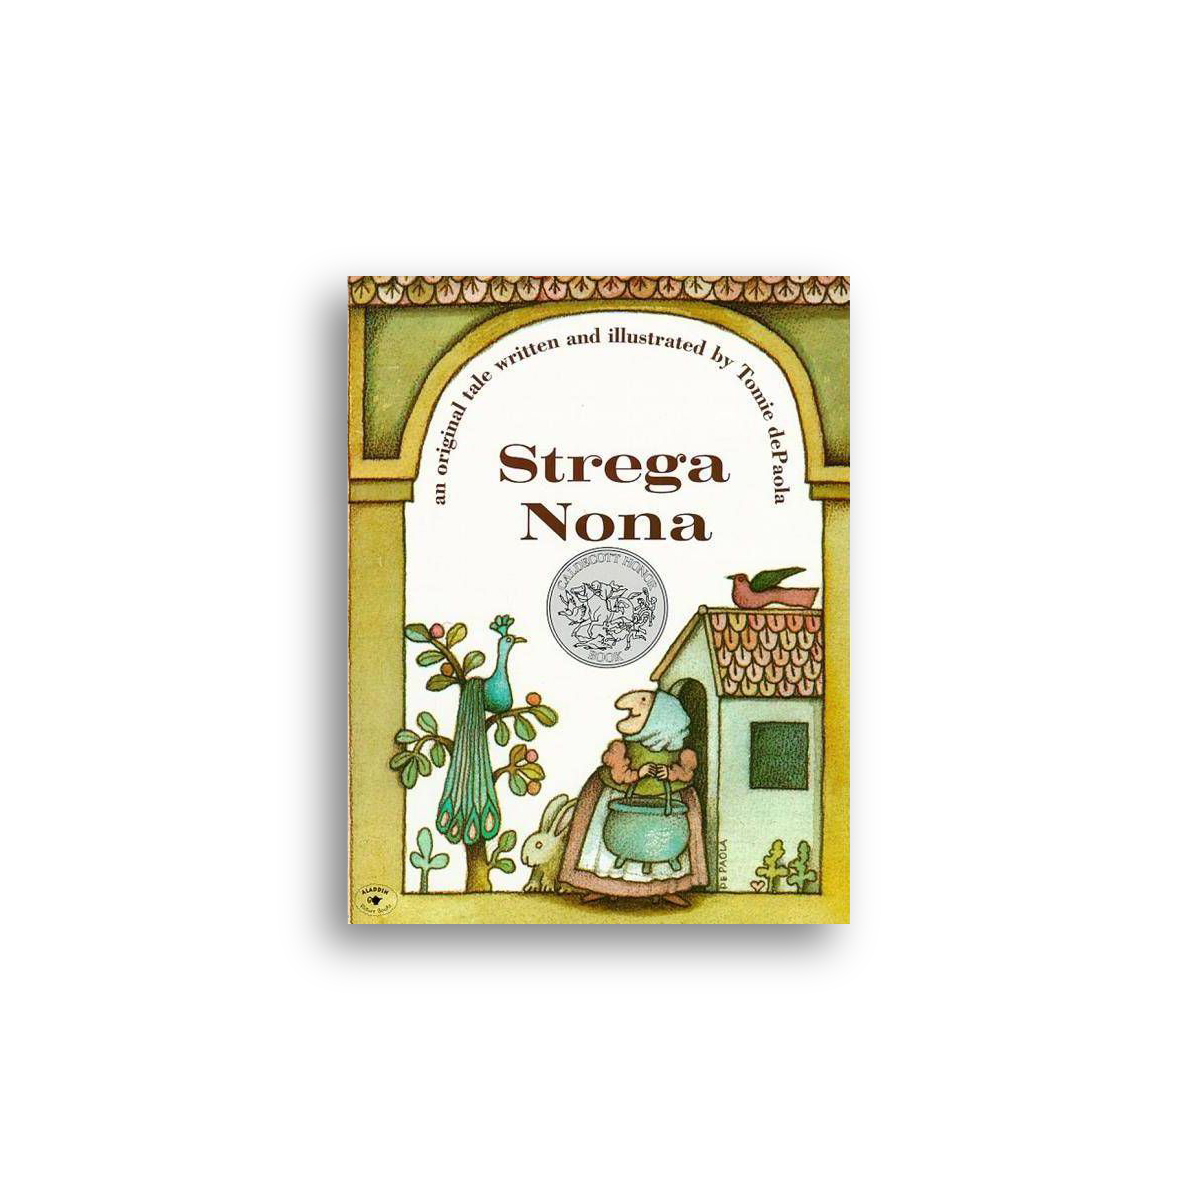 Front cover of Strega Nona, An Original Tale Written and Illustrated by Tomie dePaola, a Caldecott Medal-winning picture book. Illustration of a grandmother holding a magic pasta pot outside of her home with one peacock sitting in a tree, and one bird sitting on the roof of her home, and a rabbit next to Strega.